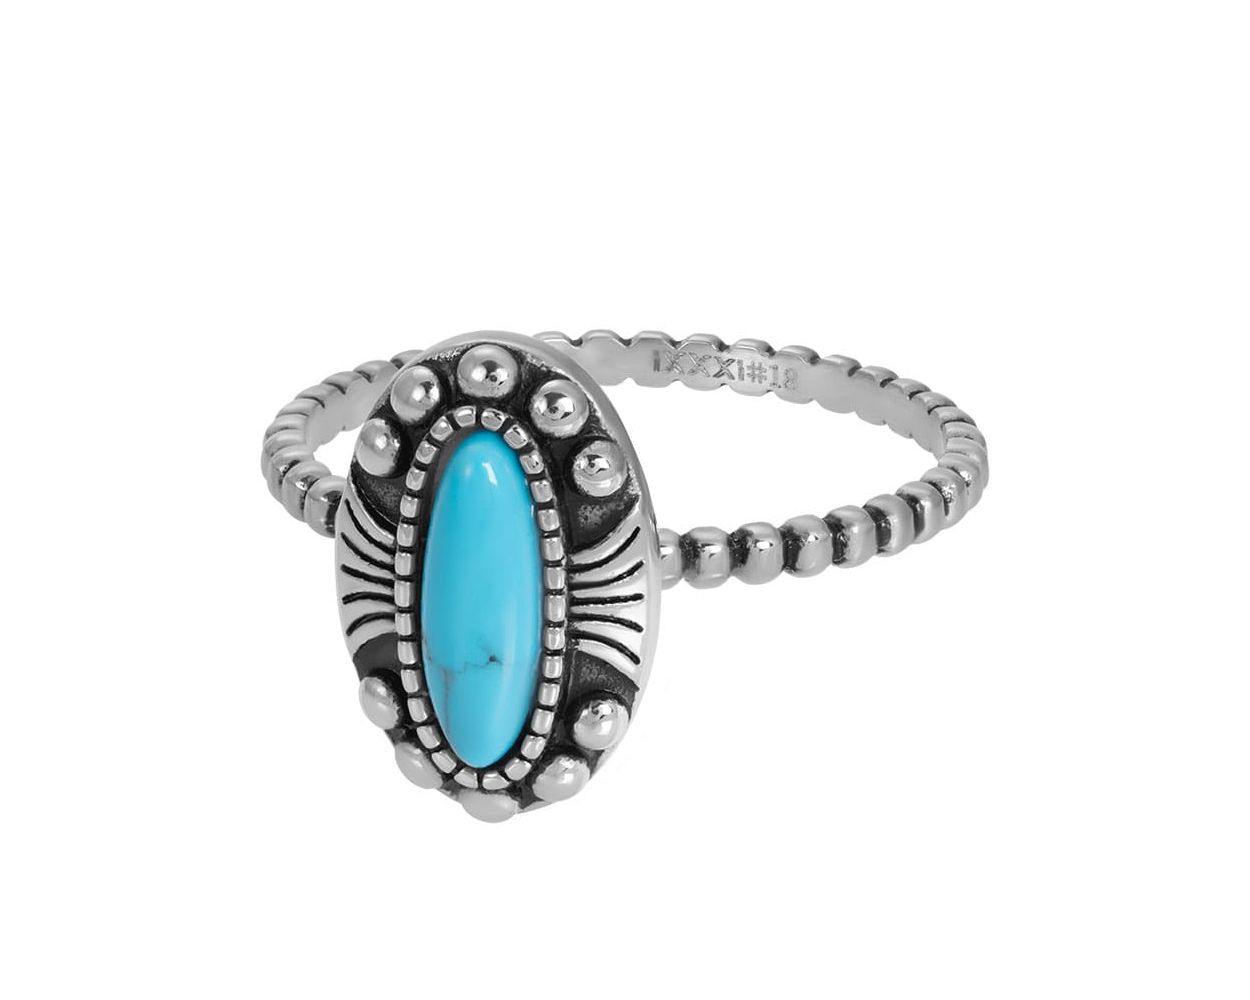 iXXXi Ring Indian Turquoise - R05910